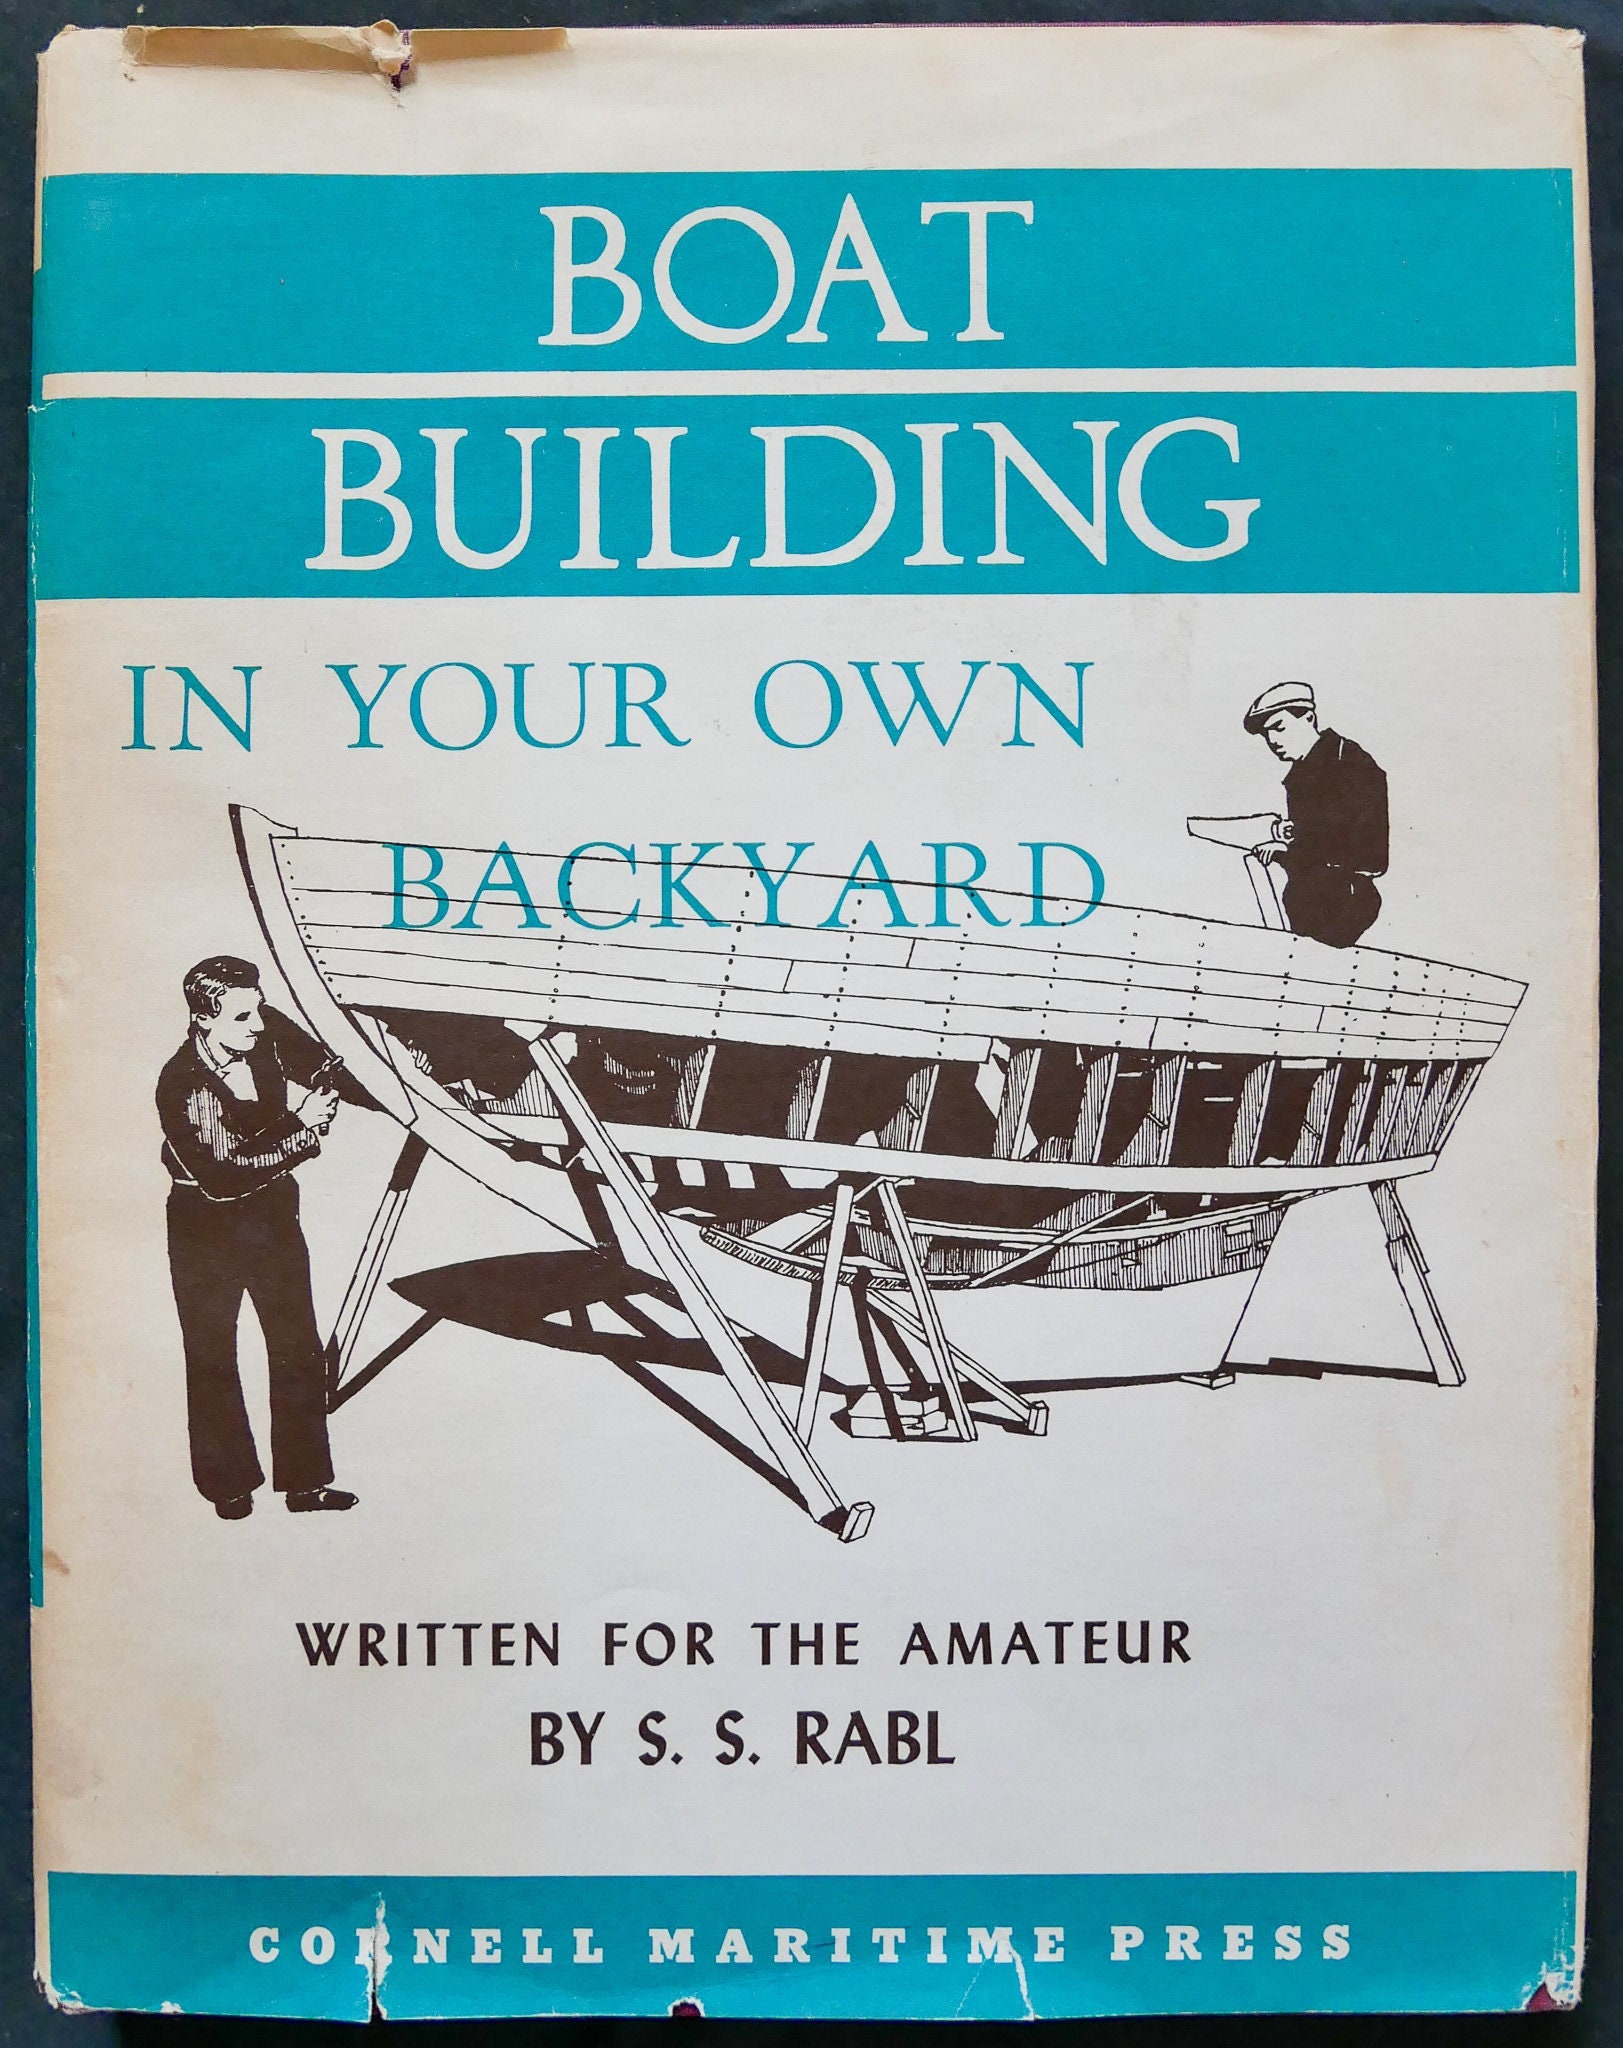 Boat Building in Your Own Backyard 1958 by S hq pic